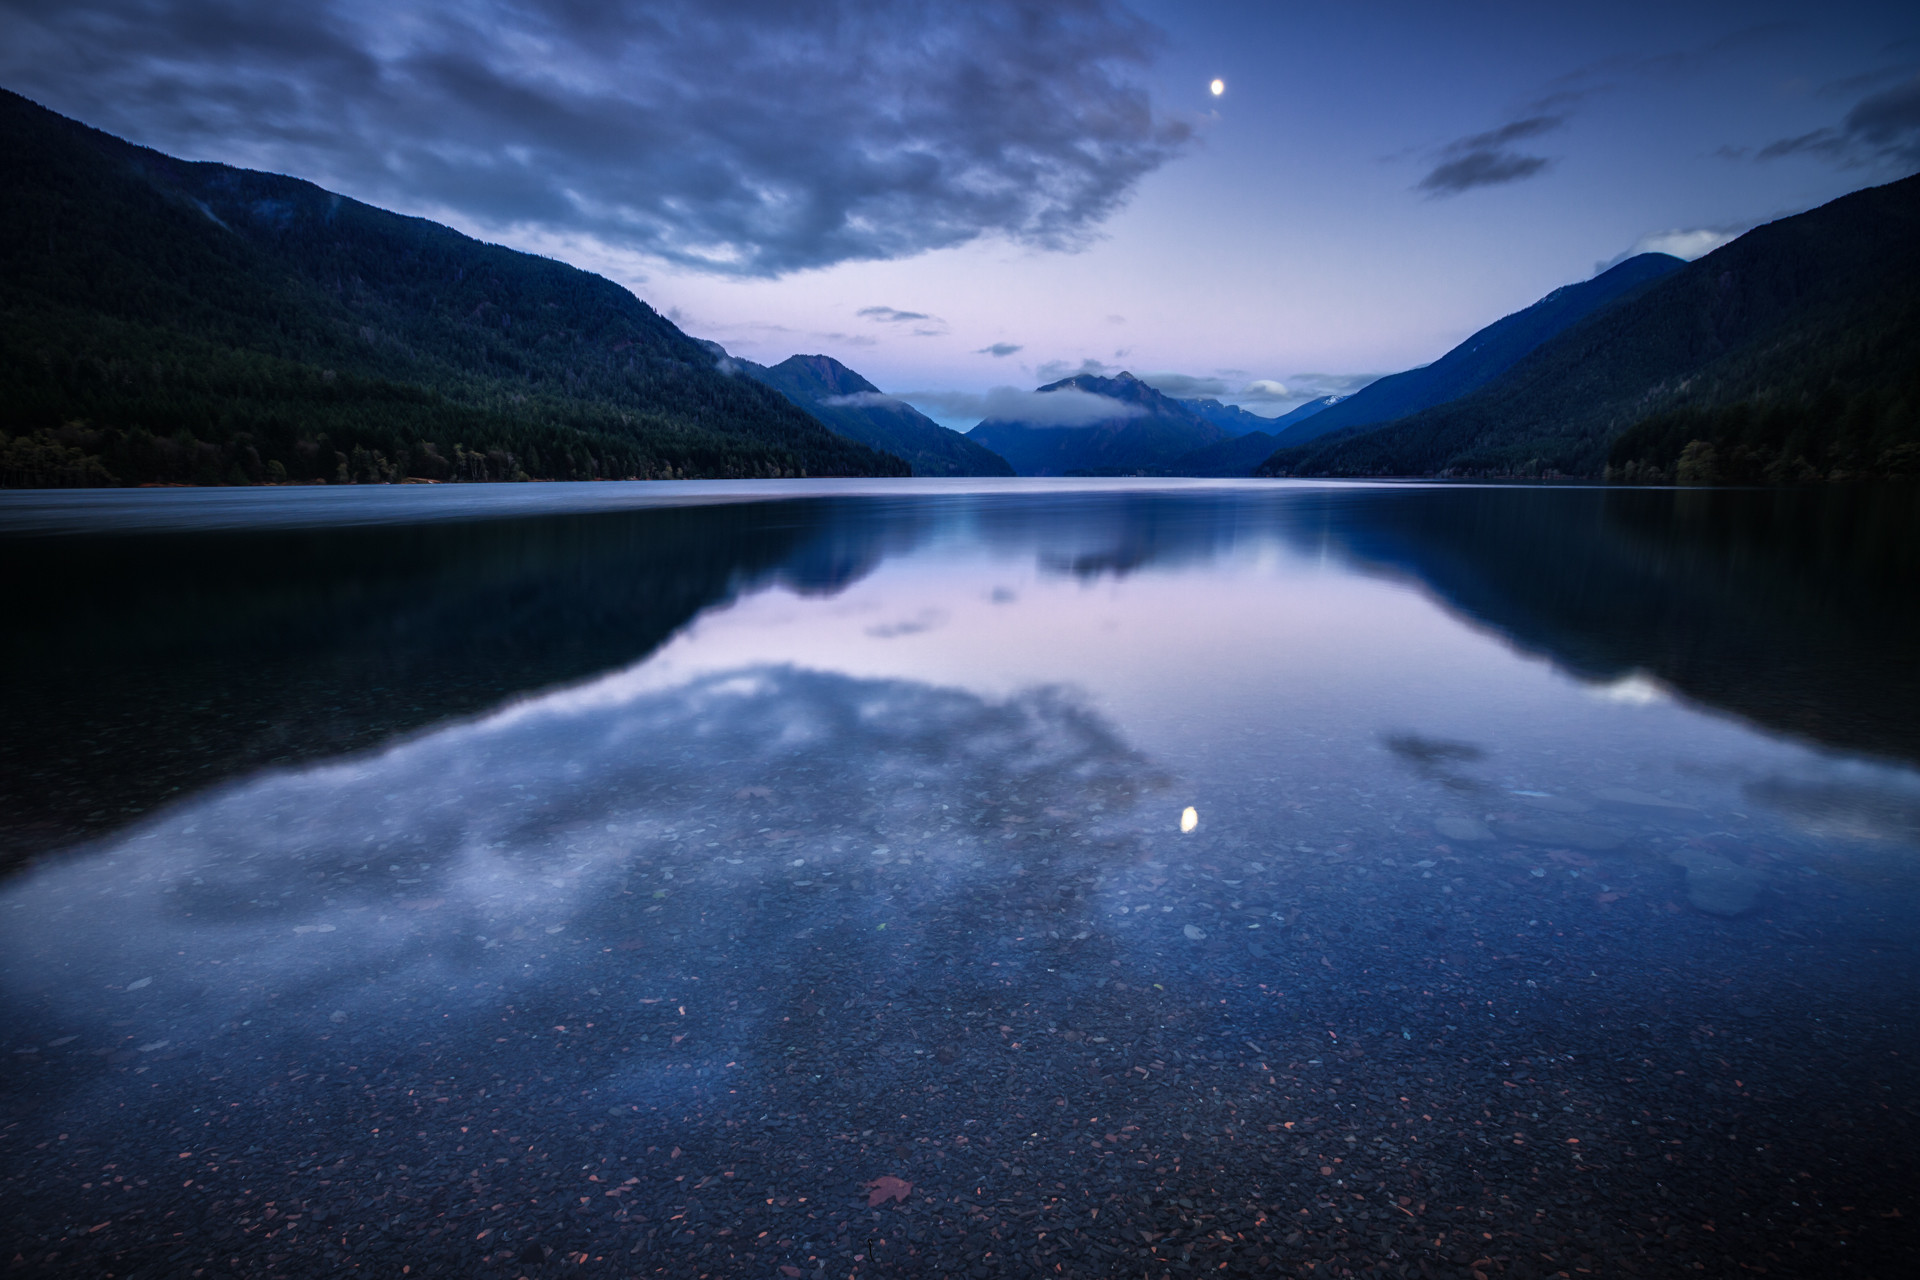 1920x1280 Mountain lake water surface night blue lilac sky clouds moon reflection  wallpaper |  | 80589 | WallpaperUP